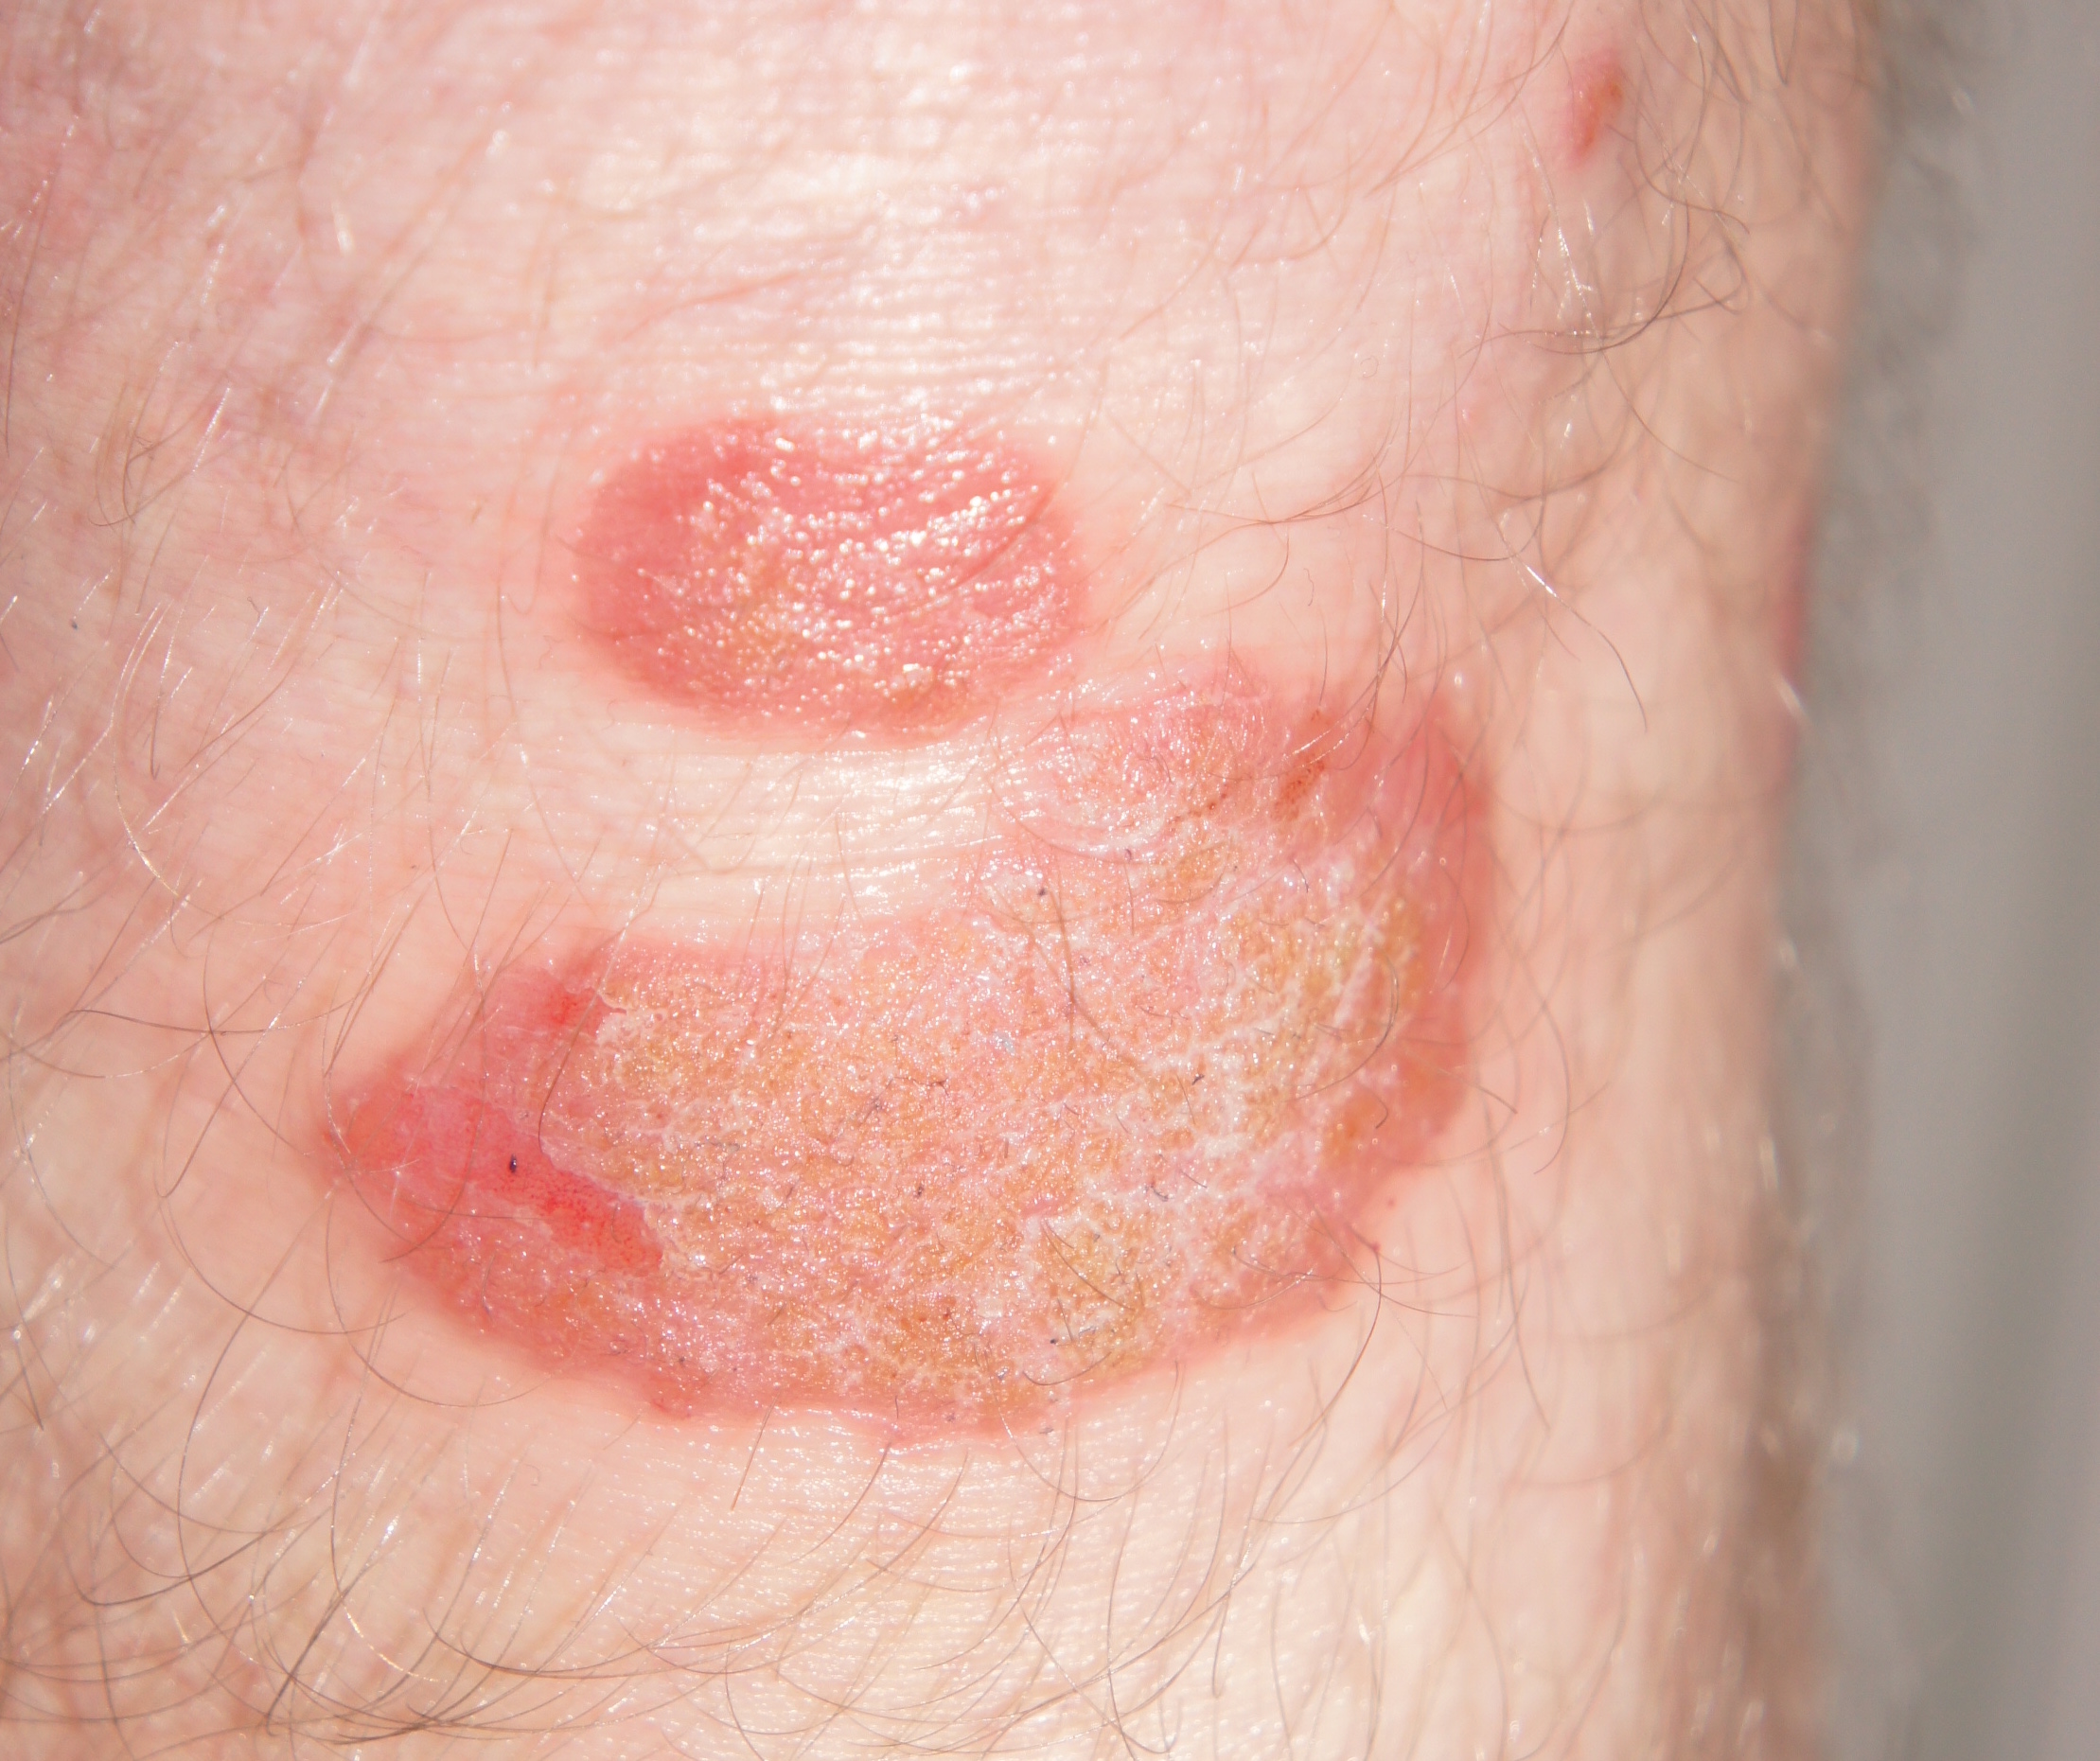 This study found a link between psoriasis and MGD. Photo: www.paul-hat-schuppenflechte.de, Wikicommons.